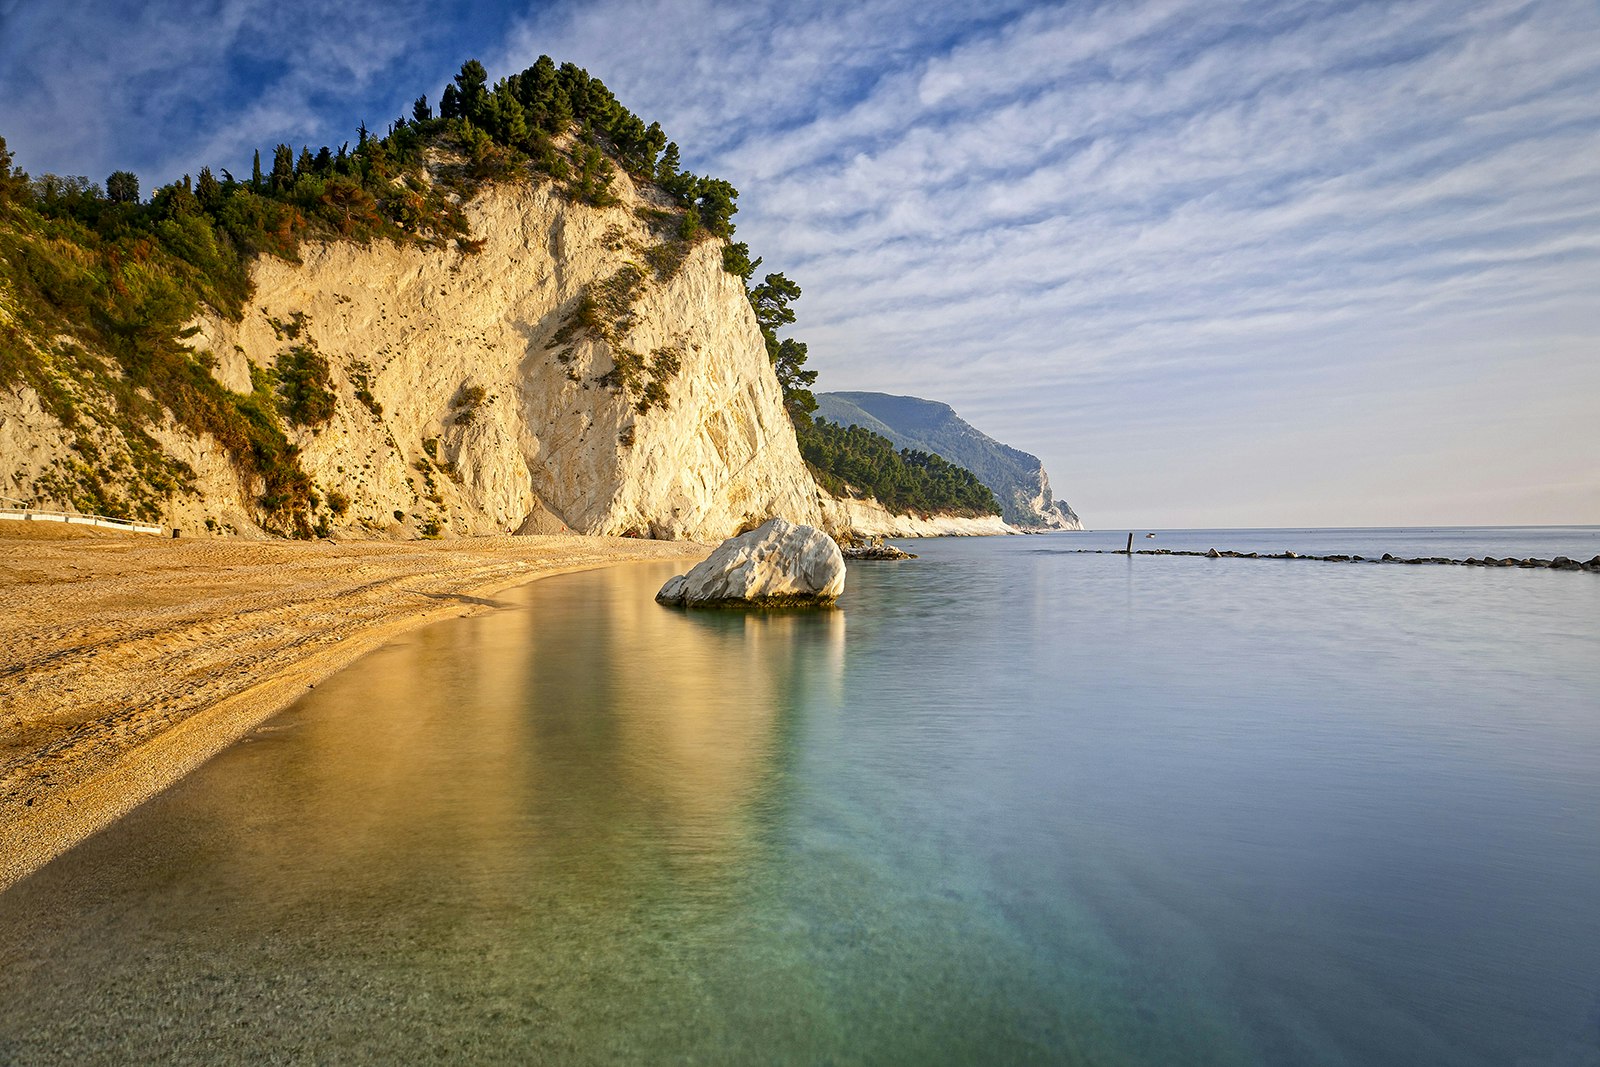 A view from the water of the rocky coastline of Parco del Conero; the cliff face is white and topped with evergreen trees, and a golden stretch of sand runs up to the hill. Le Marche, Italy.